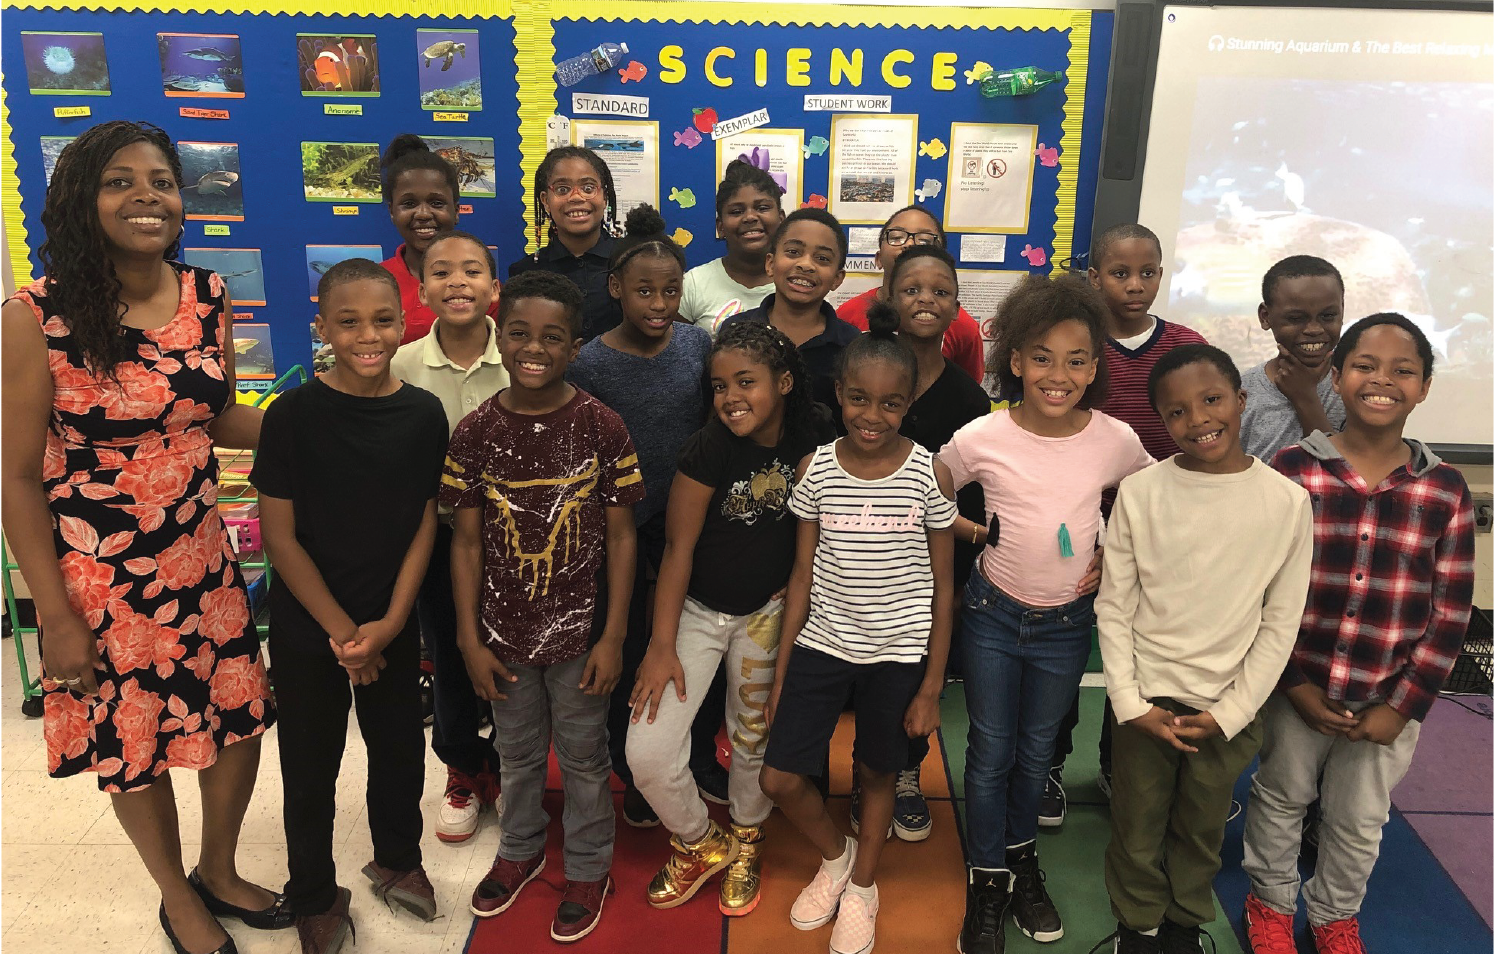 Sharon Thomas and her third grade class at Panola Way Elementary School in Lithonia, Georgia.